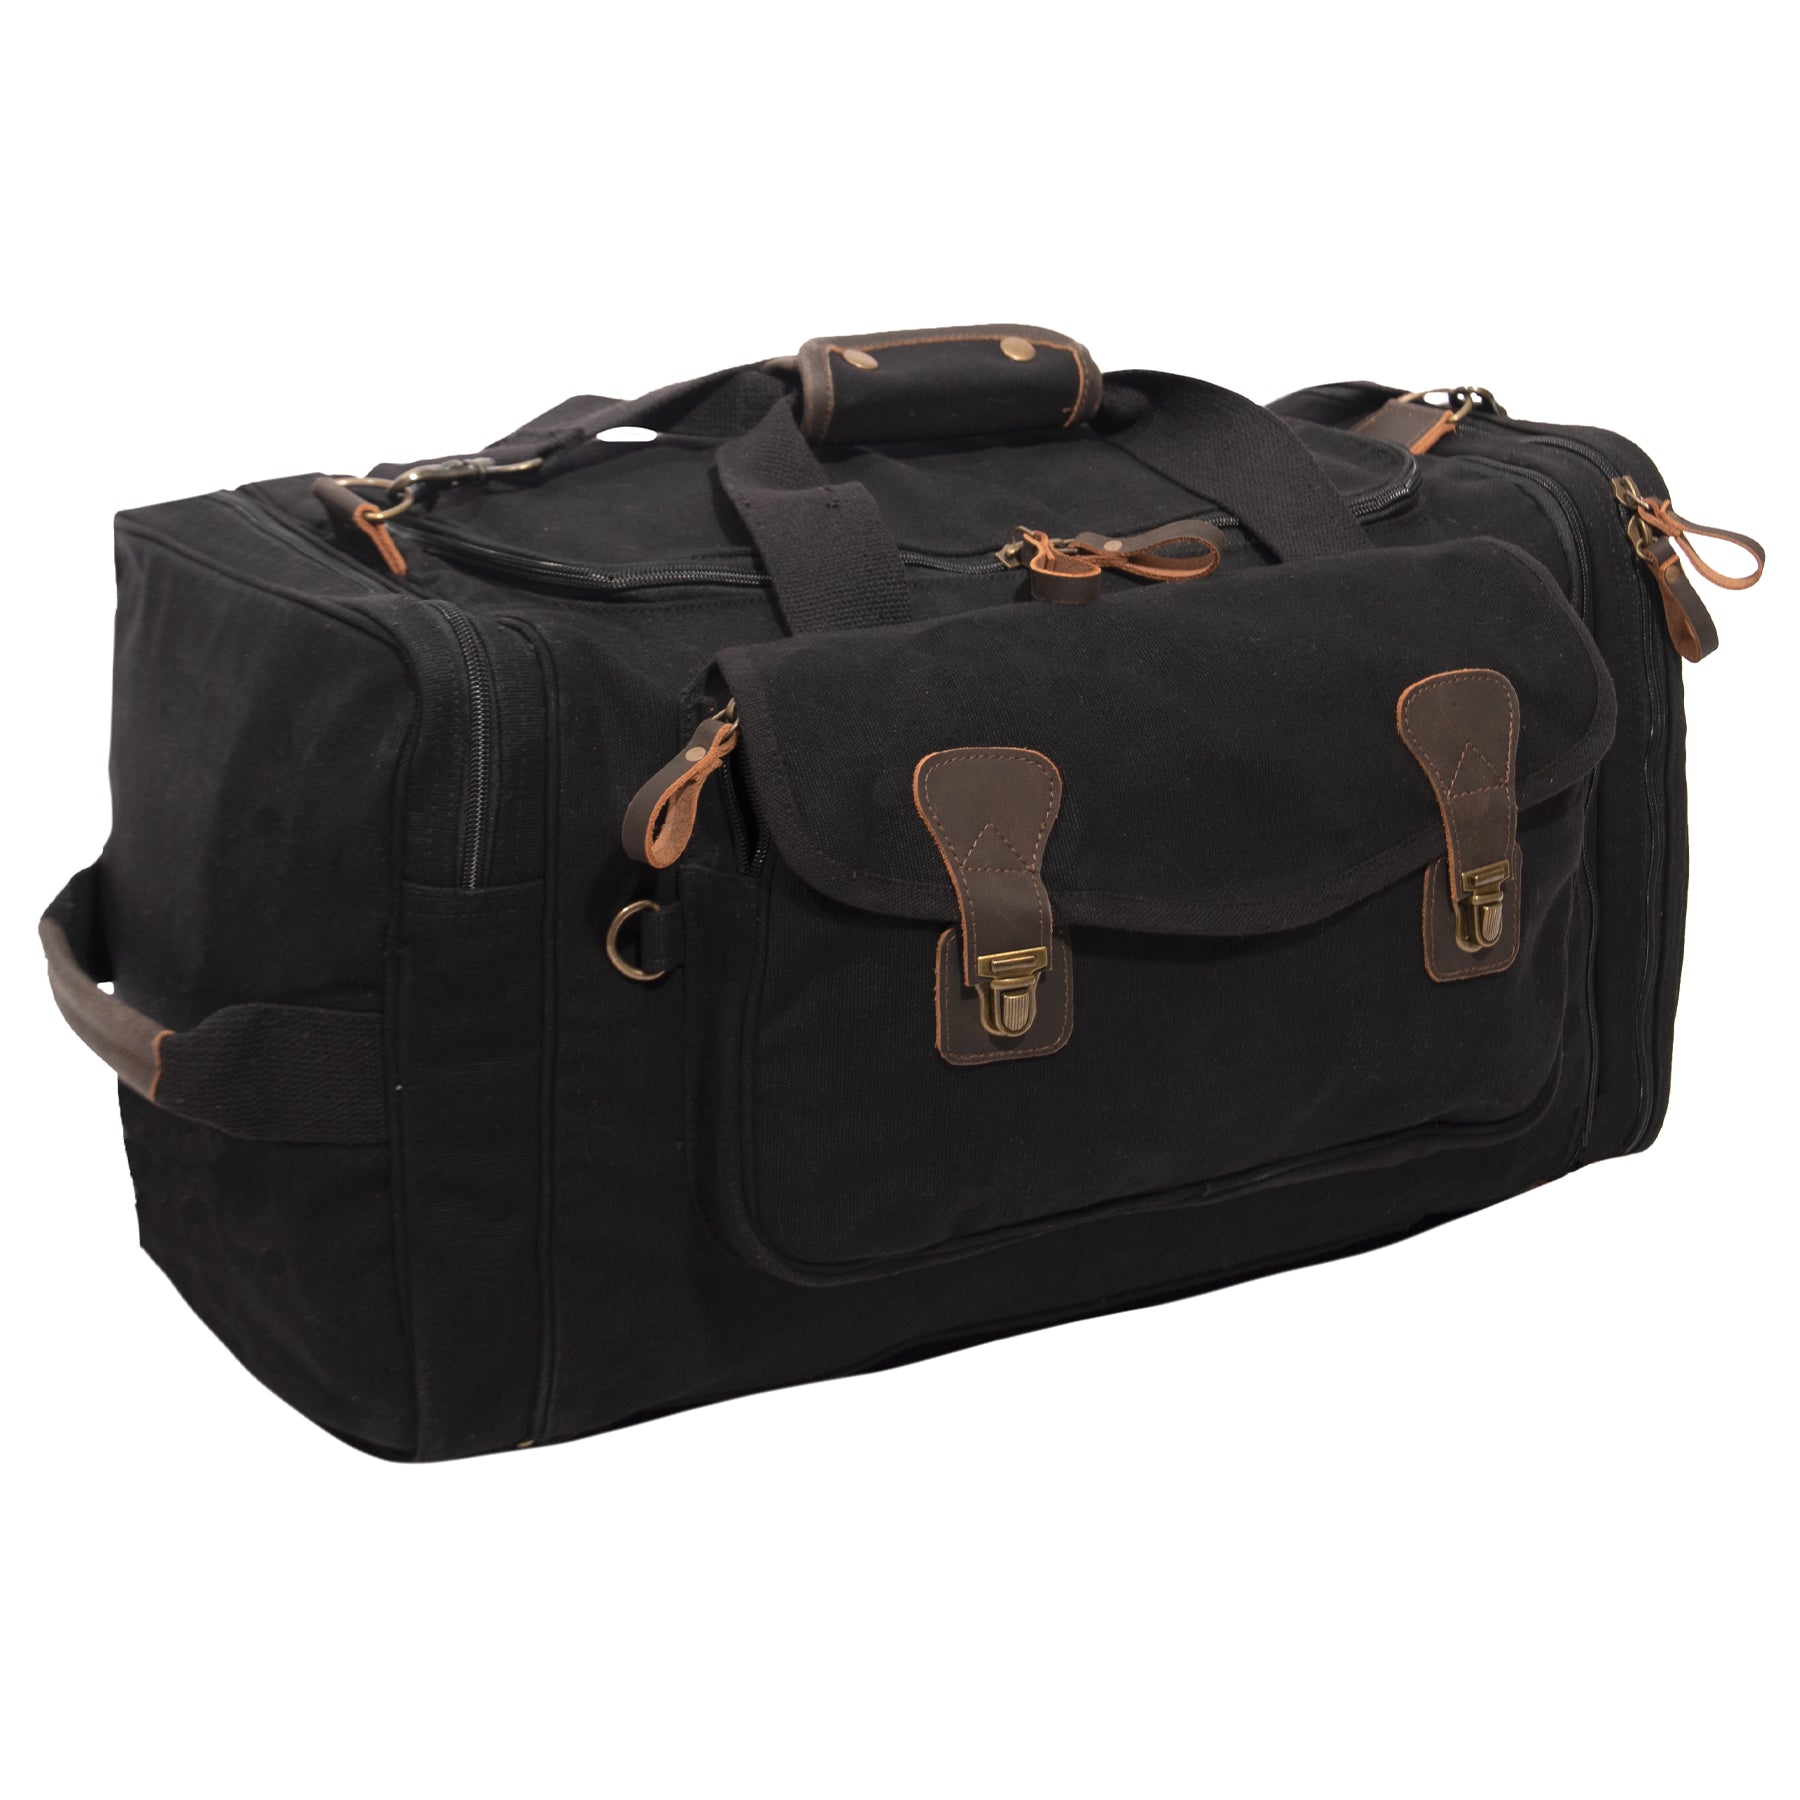 Milspec Canvas Extended Stay Travel Duffle Bag New Arrivals MilTac Tactical Military Outdoor Gear Australia